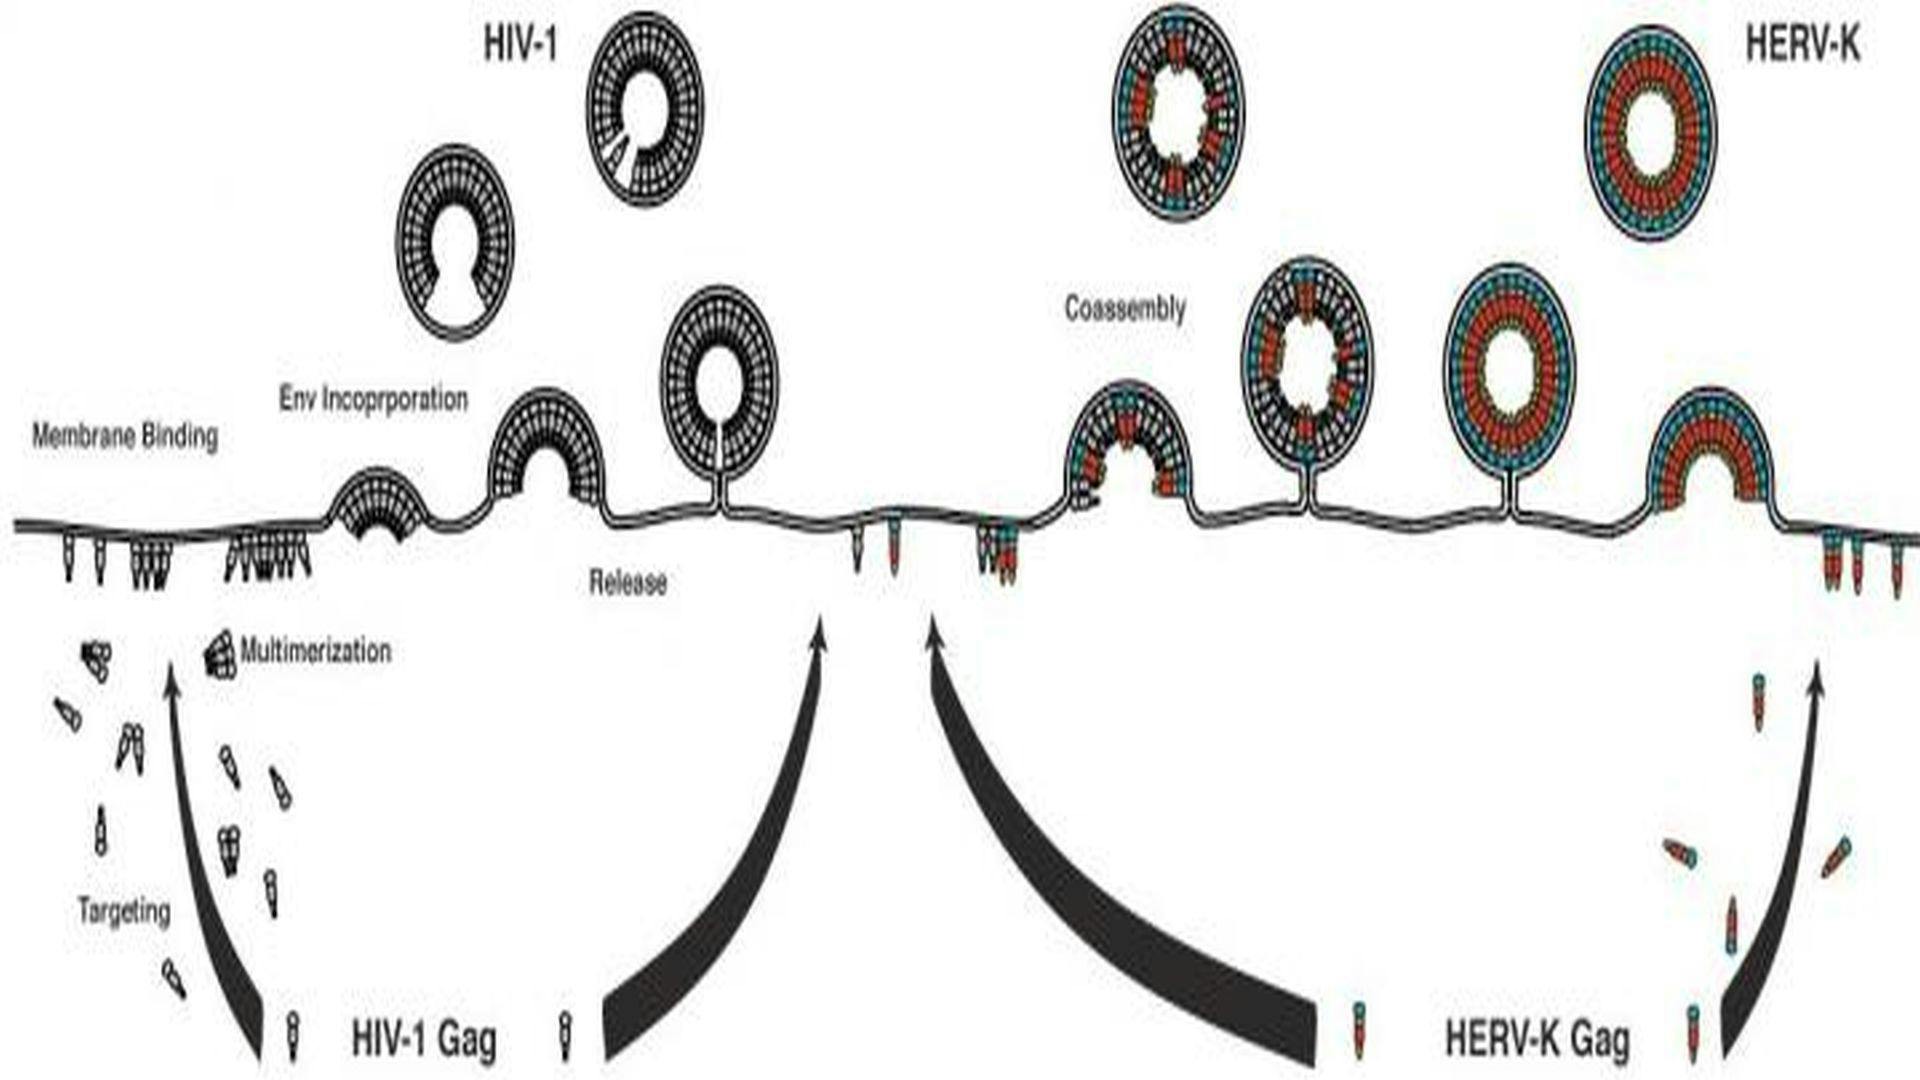 Ancient Retrovirus Embedded in the Human Genome Helps Fight HIV-1 Infection